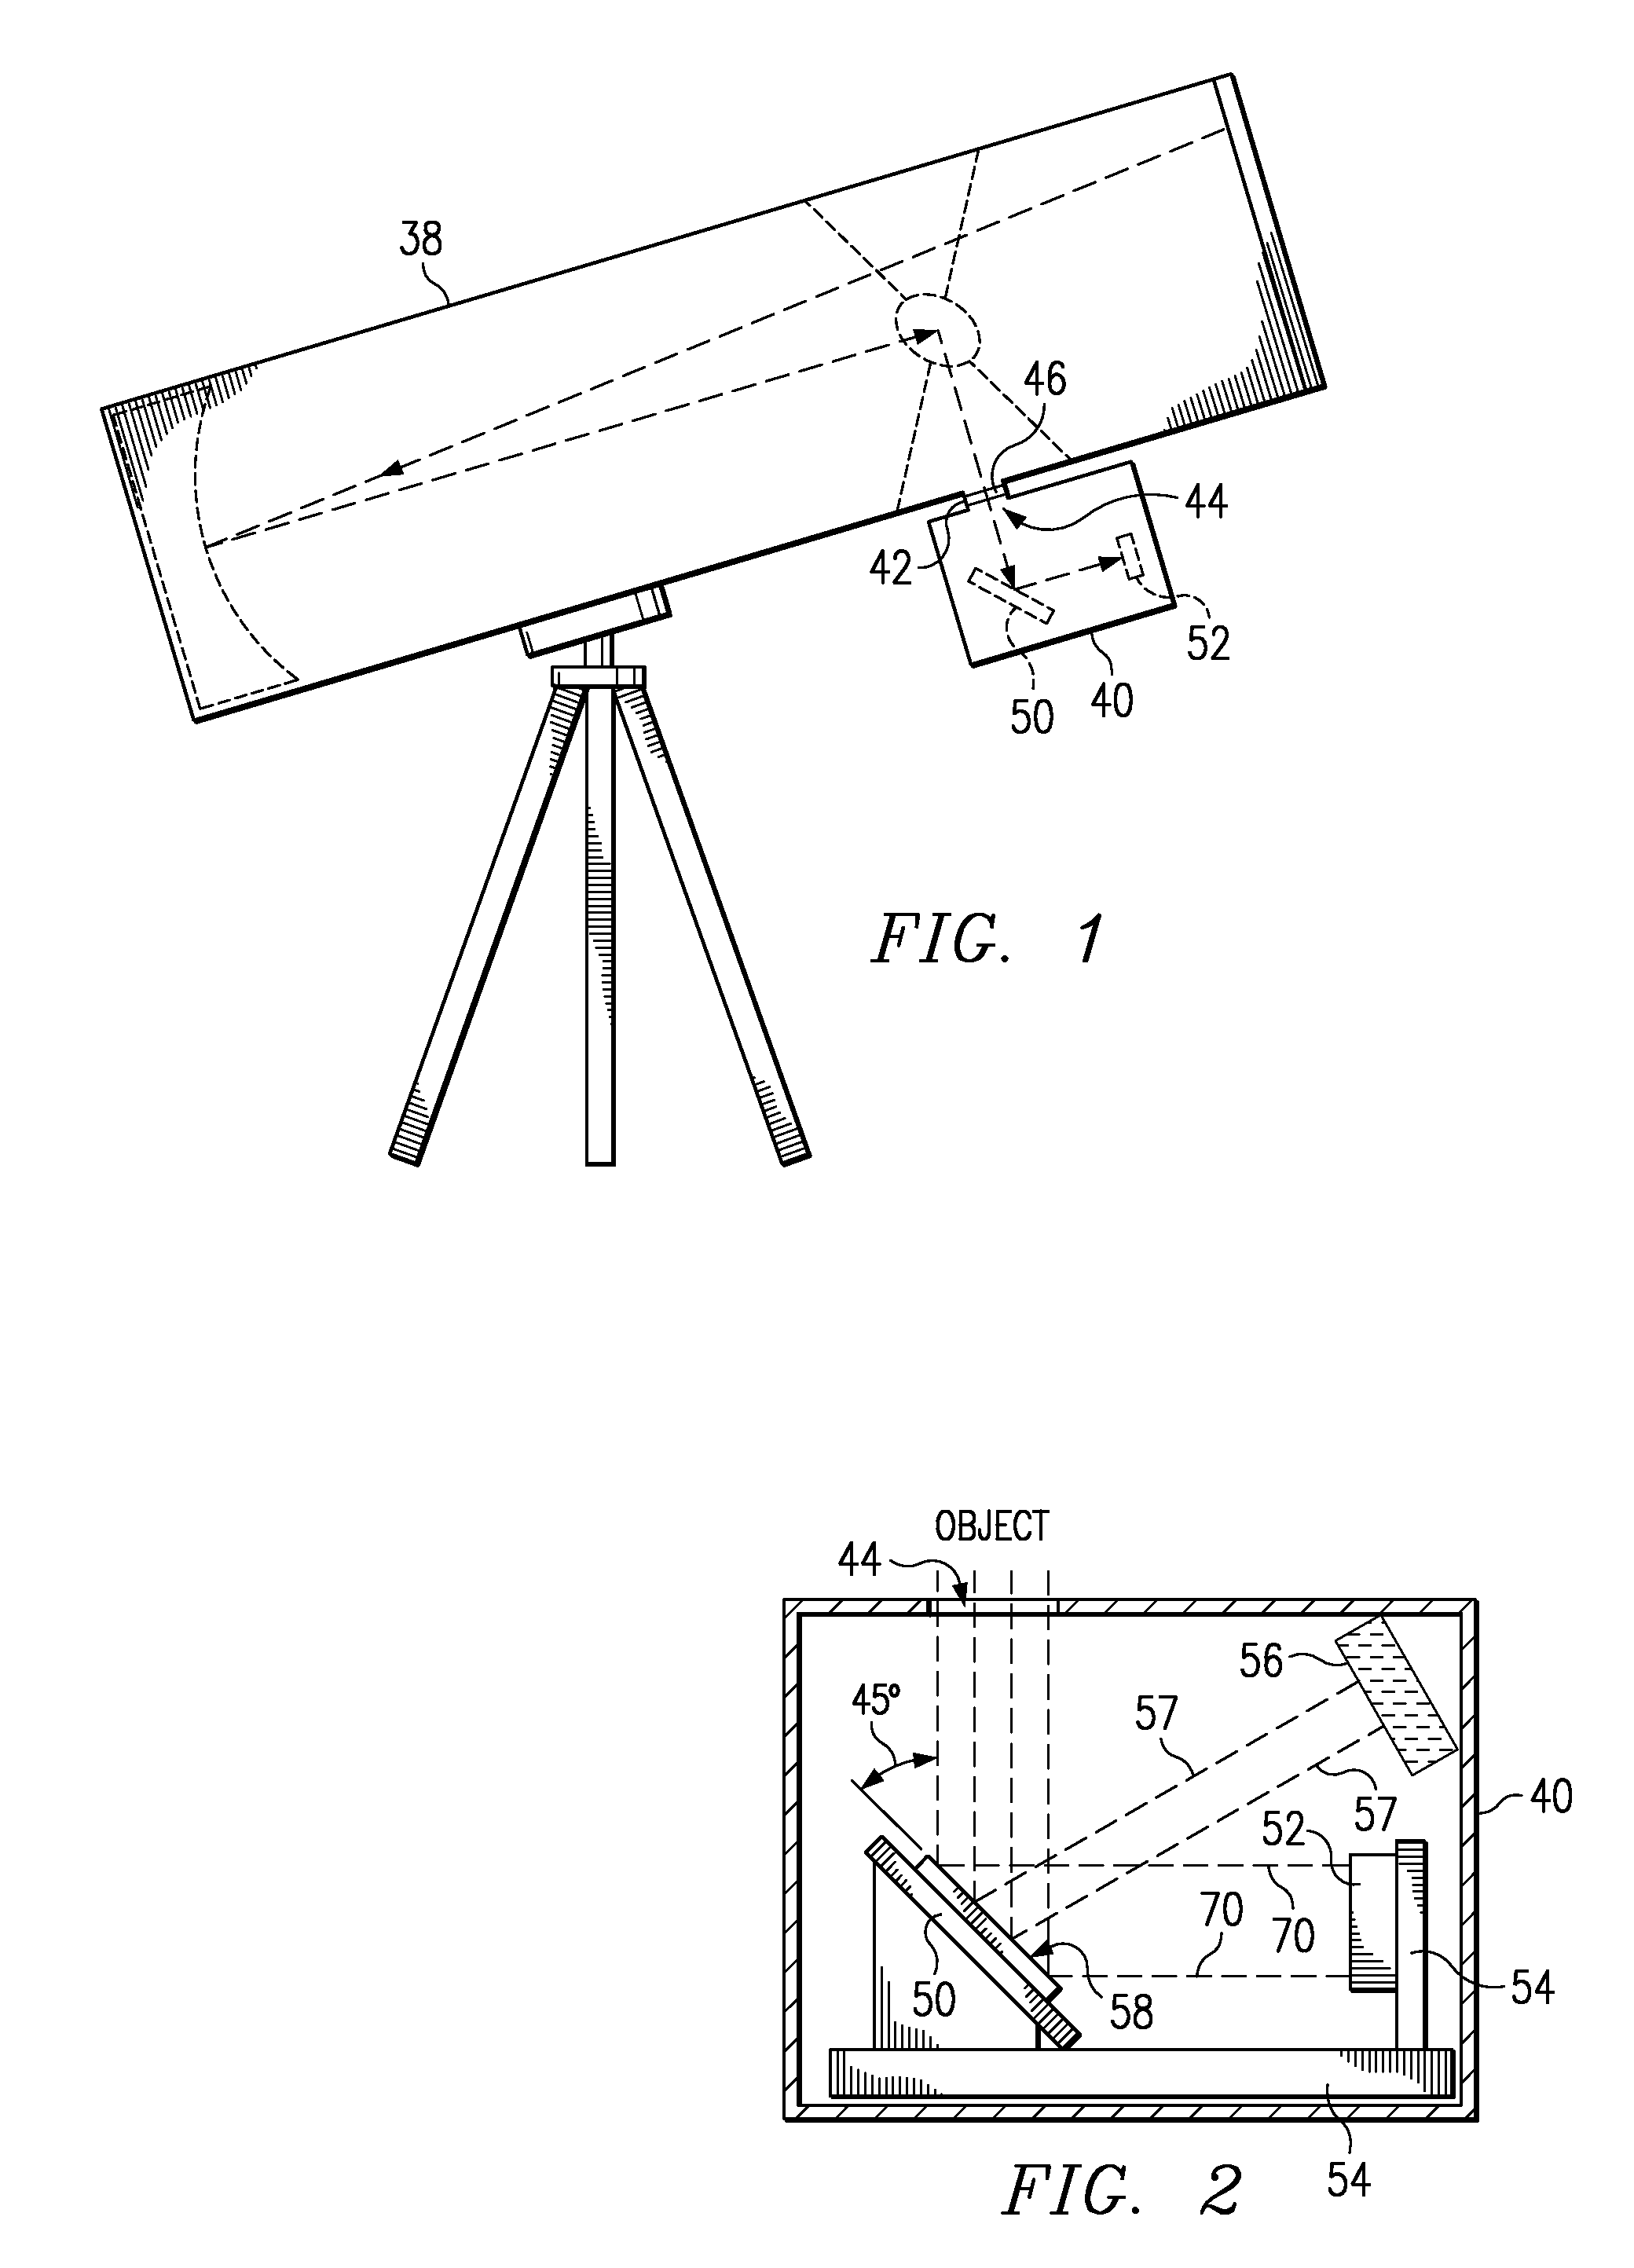 System and Method for Varying Exposure Time for Different Parts of a Field of View While Acquiring an Image